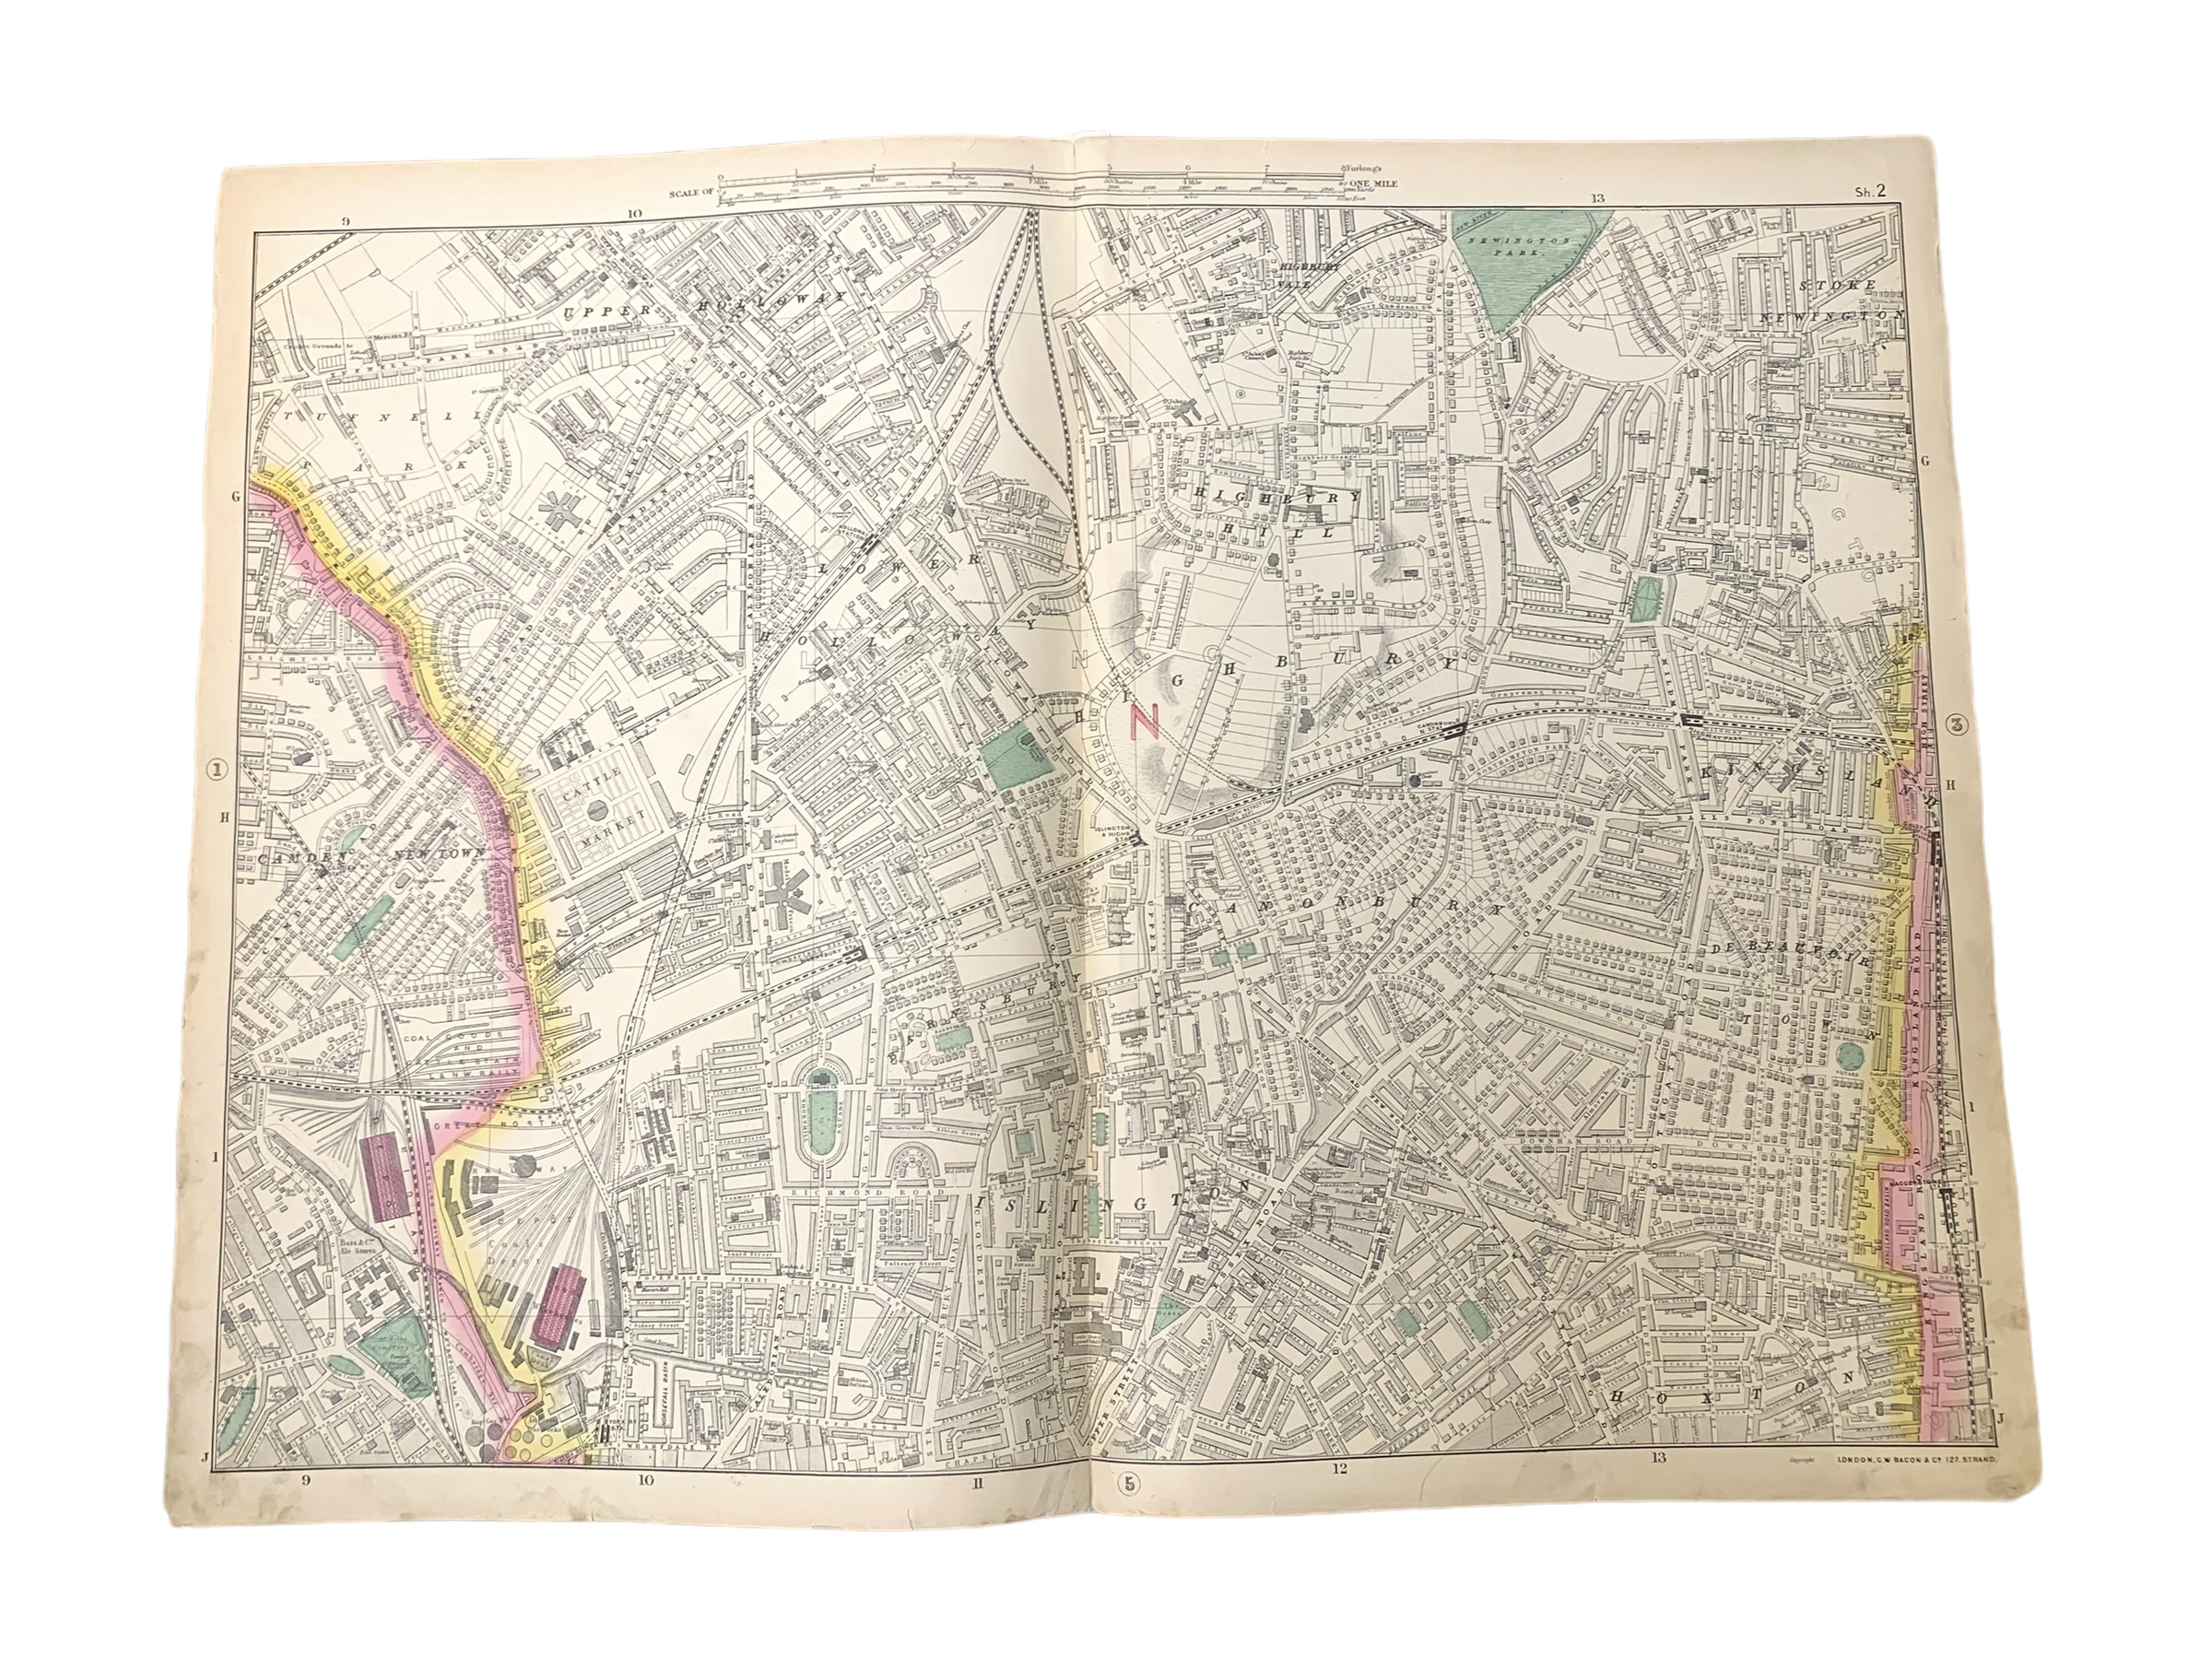 Bacon's New Ordnance Survey Atlas of London and Suburbs, c. 1880 - Image 5 of 7